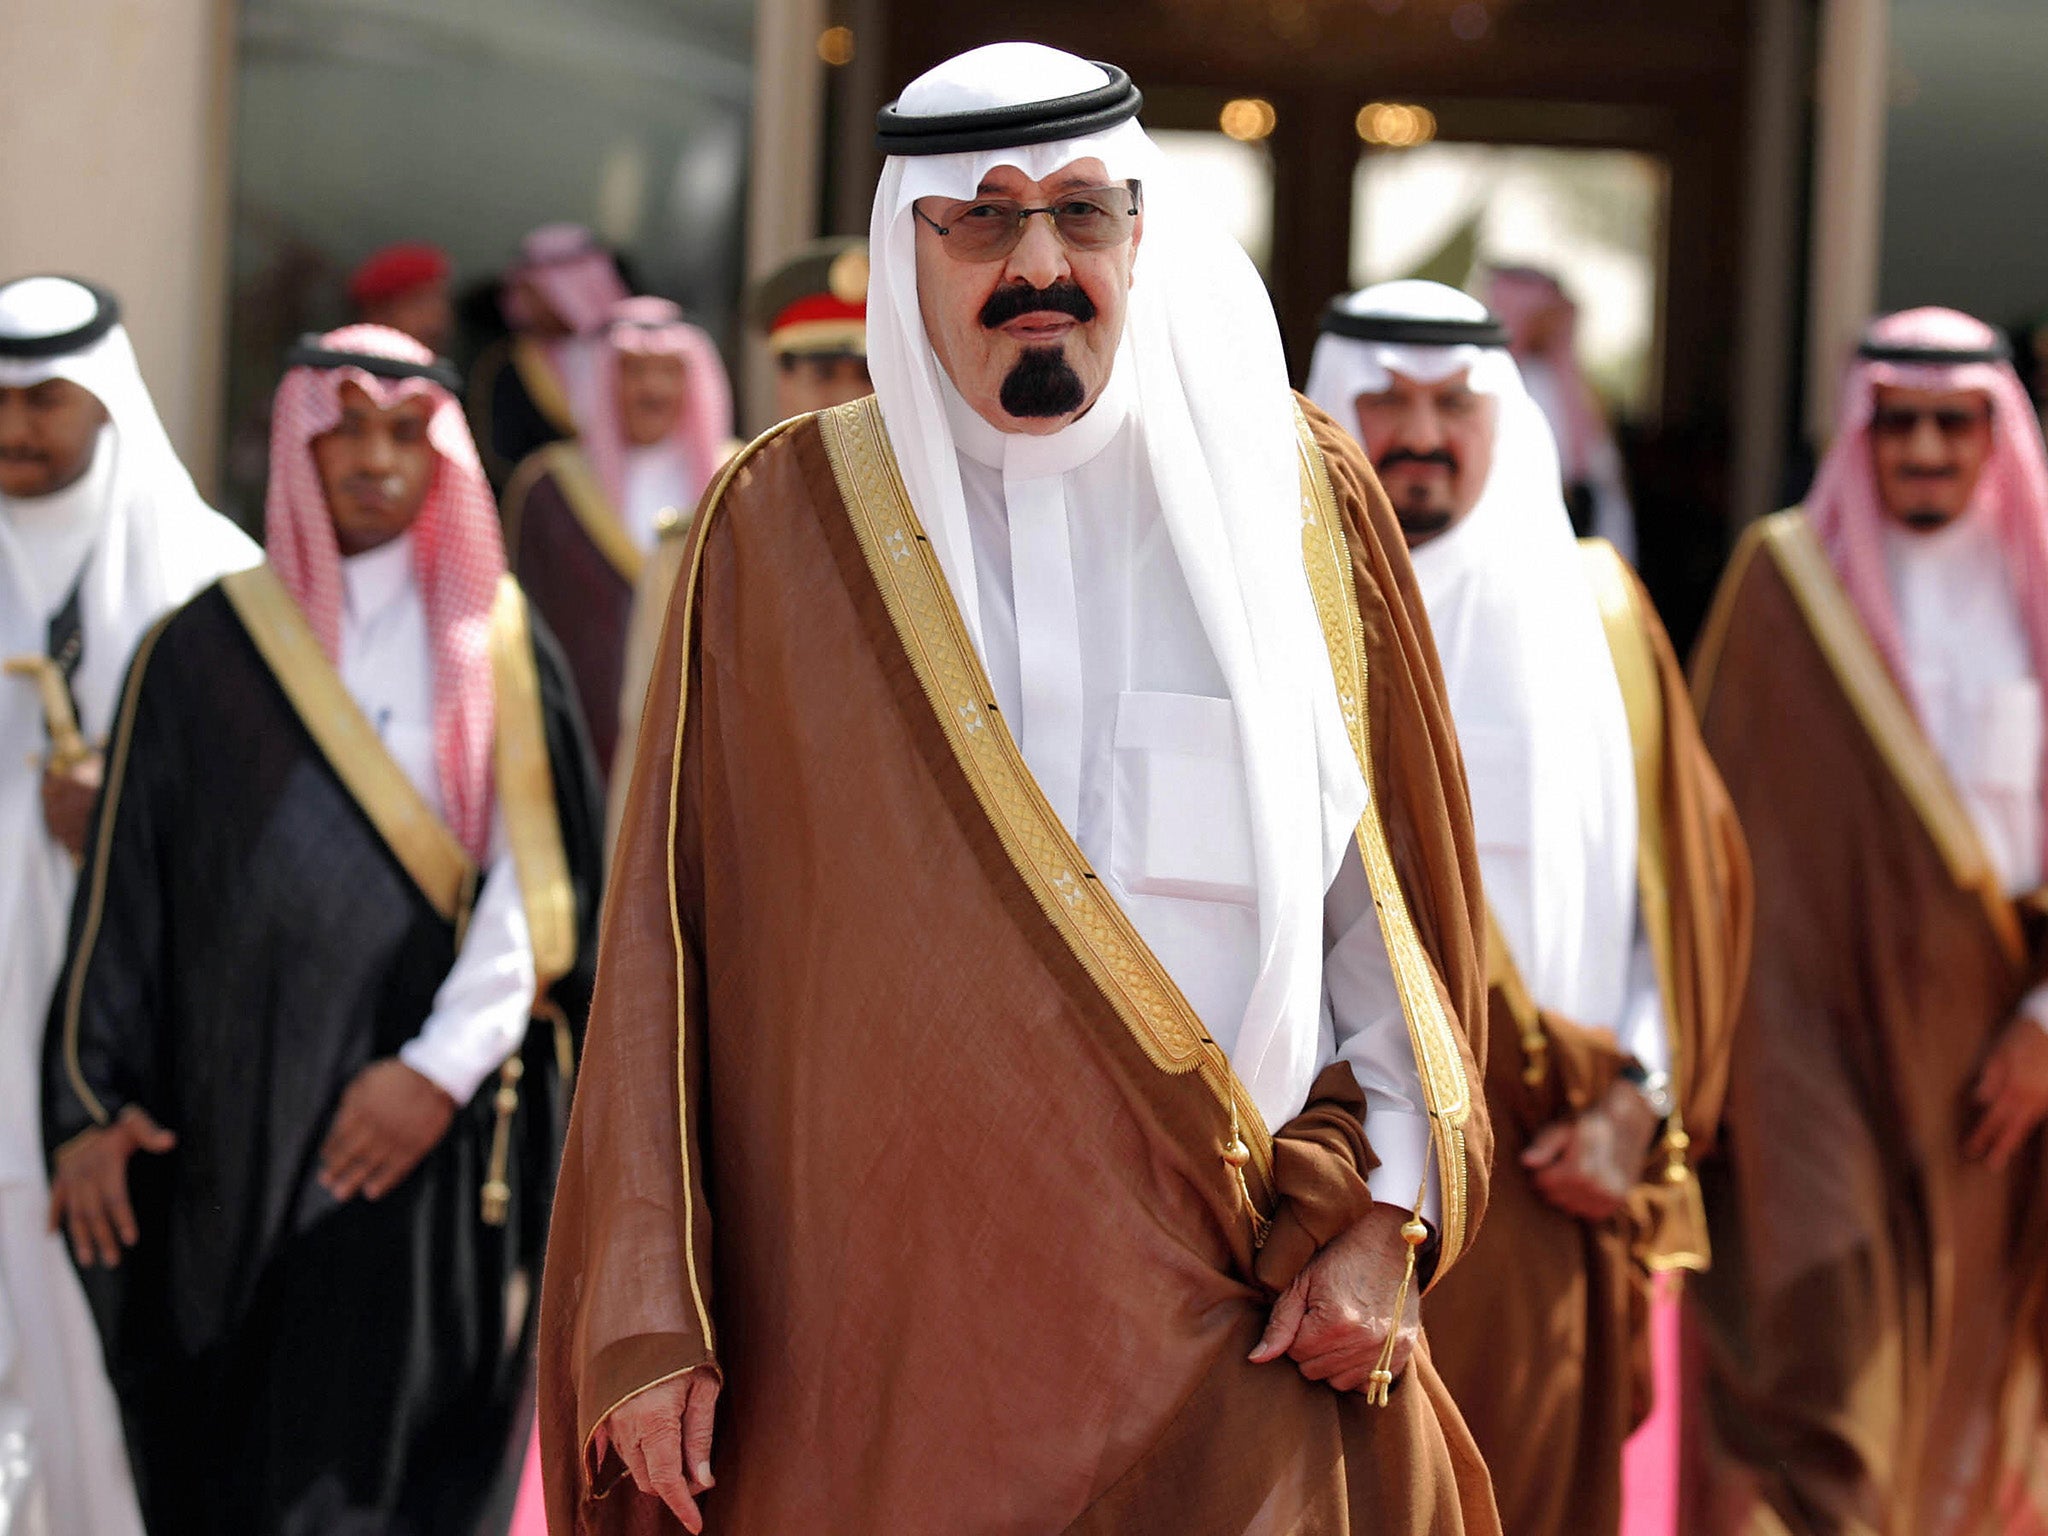 Calls are being made for Saudi Arabia to be expelled from the UN Human Rights Council